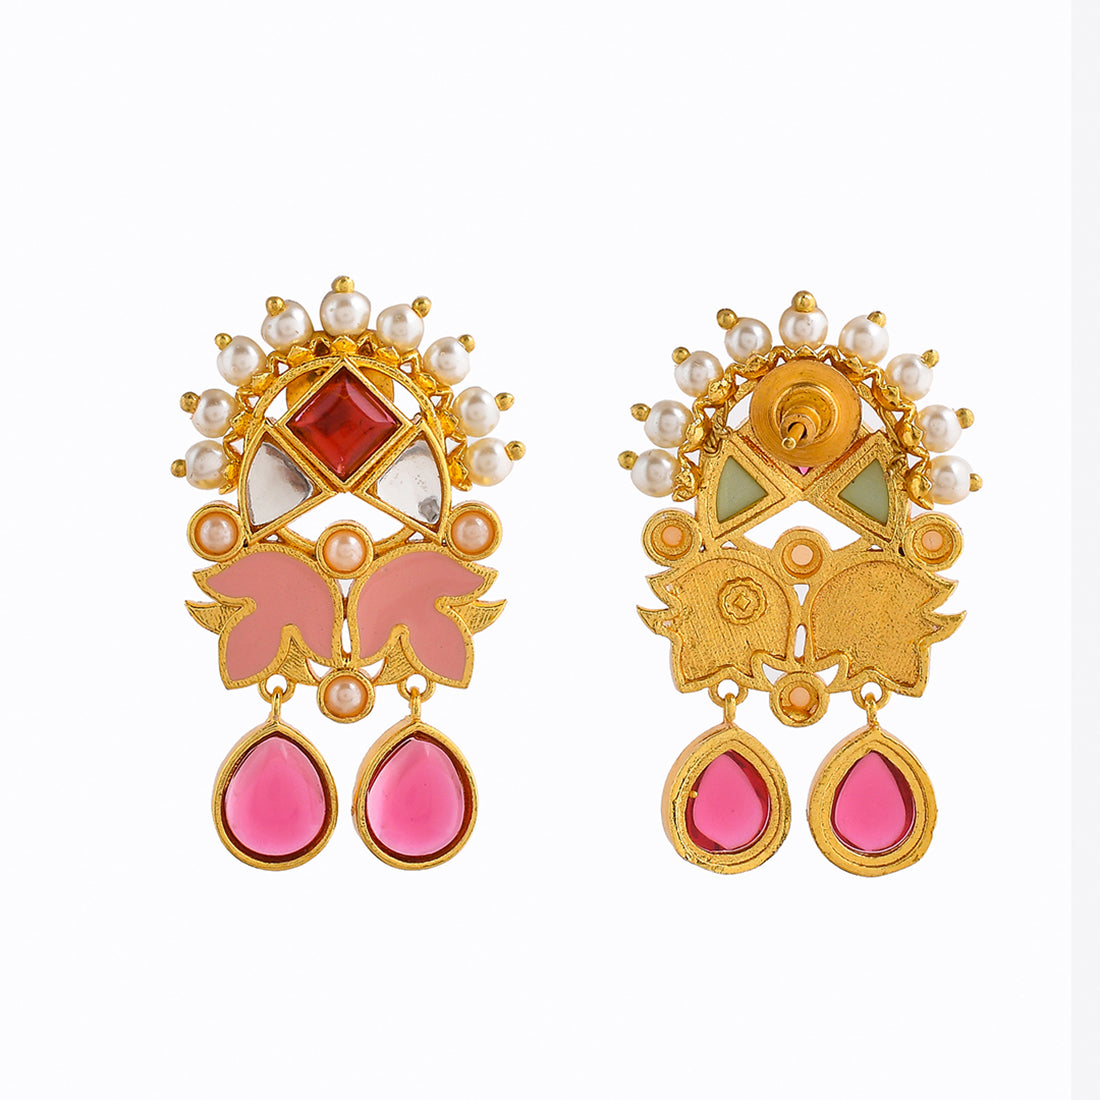 Forever More Enamelled Pink Stones and Pearls Floral Earrings